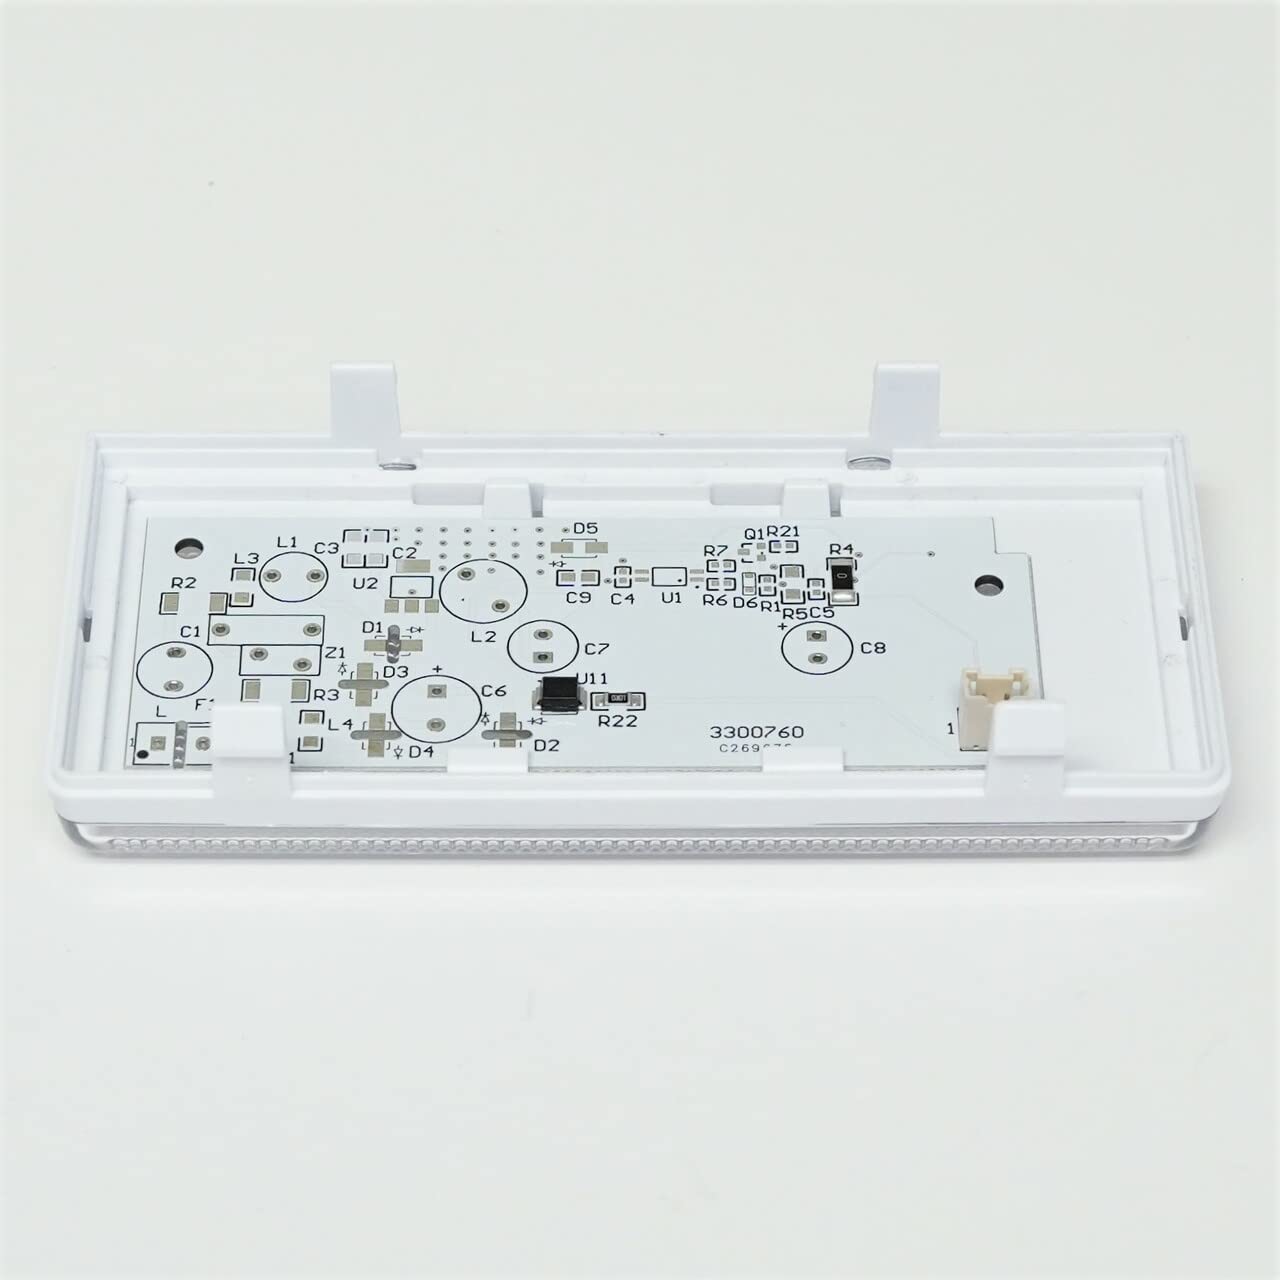 W11104452 LED Light Module Assembly with Case for Whirlpool, Kenmore or Maytag Washers